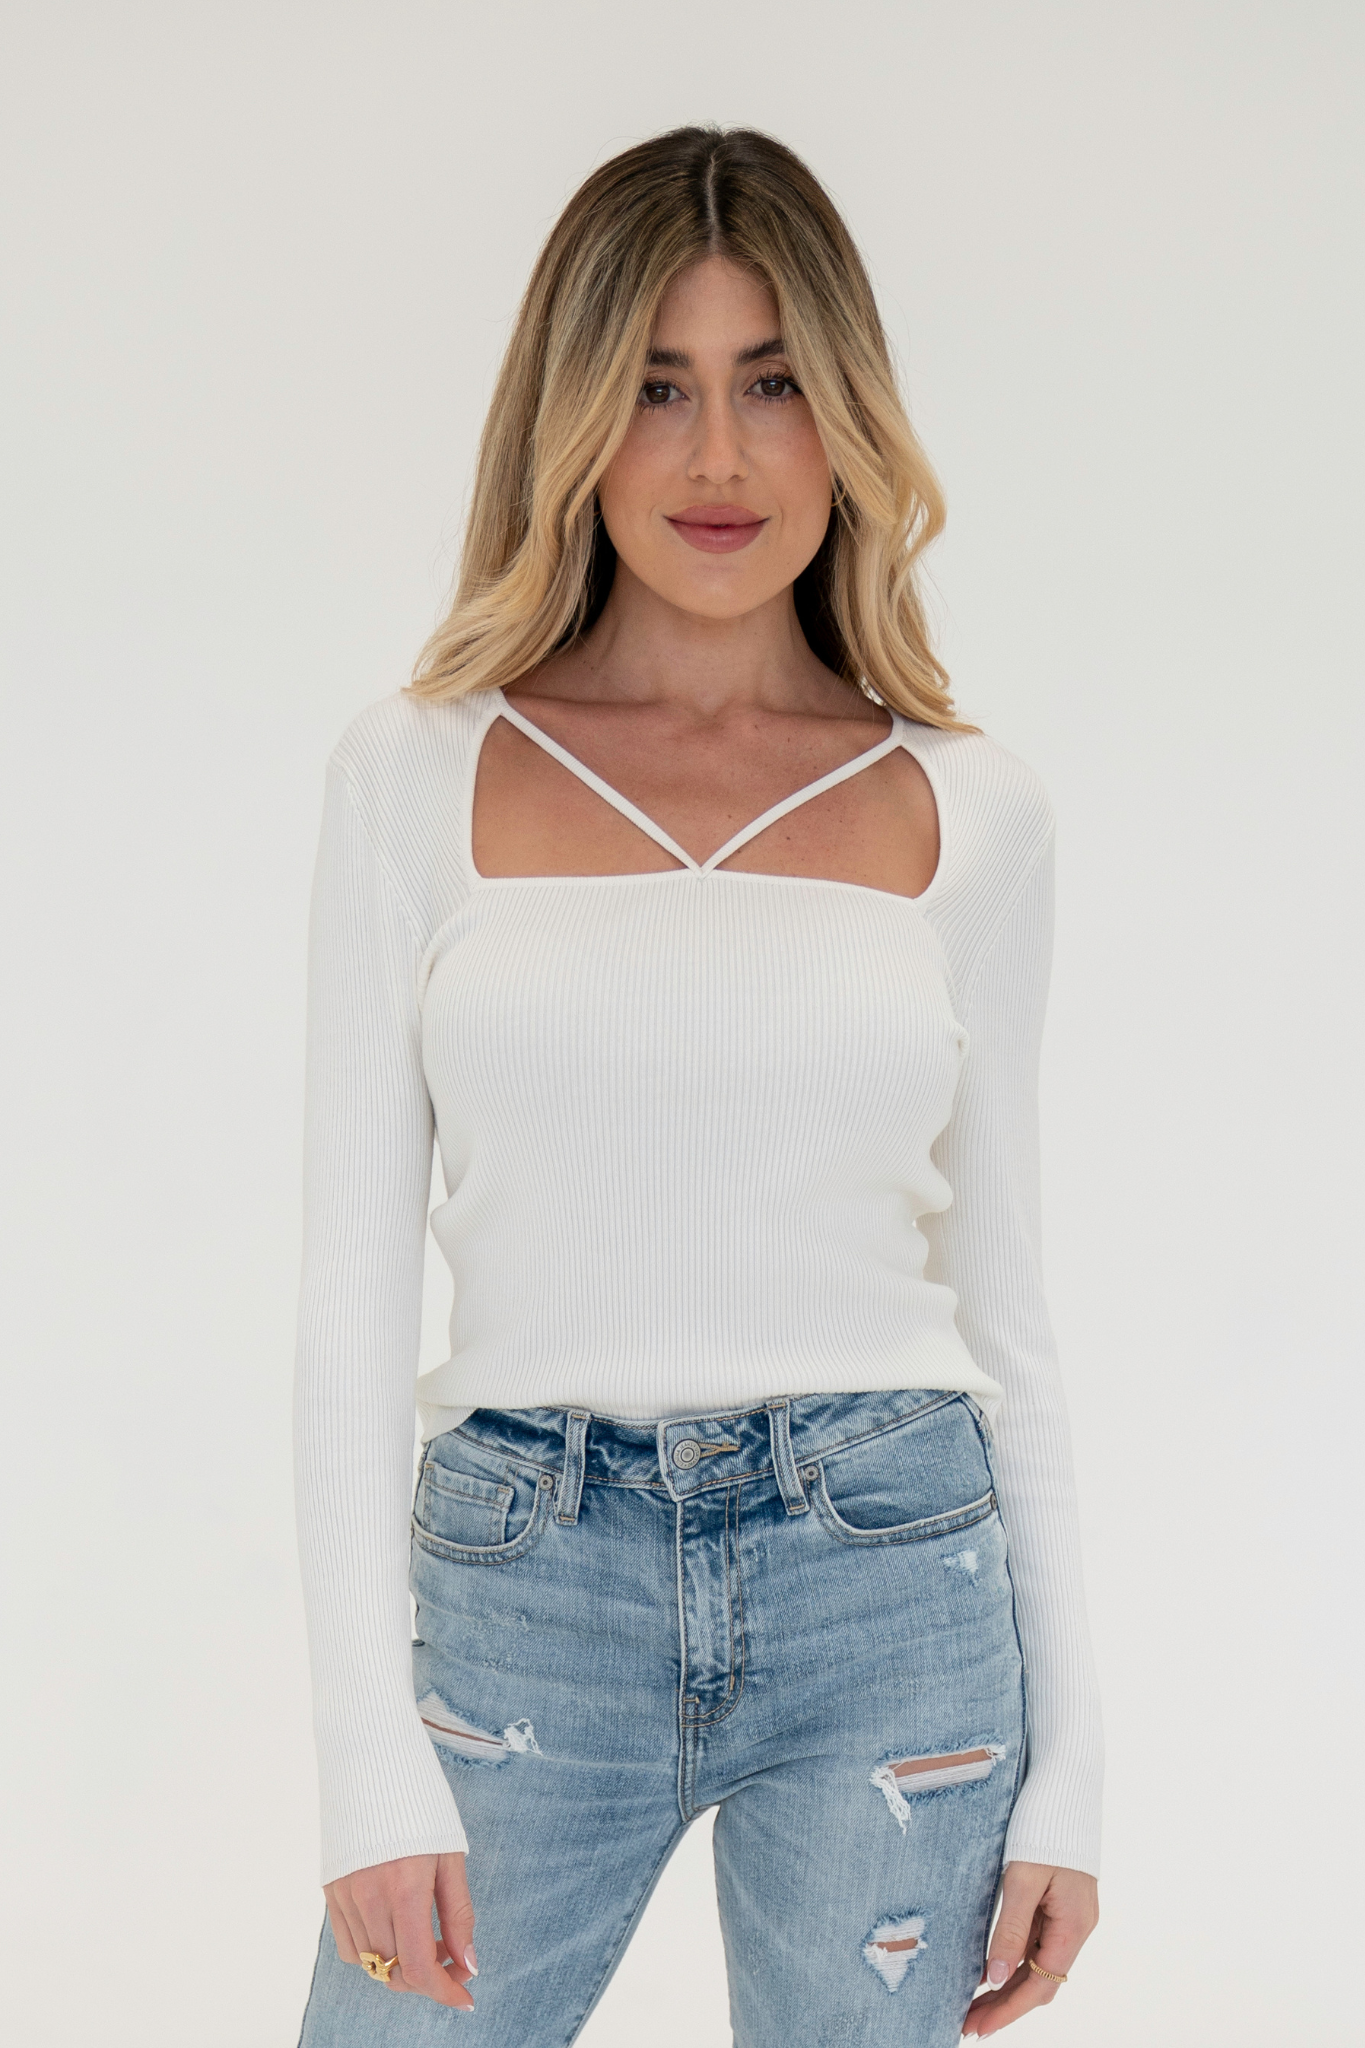 View 1 of Kala Long Sleeve Top, a Tops from Larrea Cove. Detail: If you're looking for an elevated basic that you can wear endless ways, the Kal...